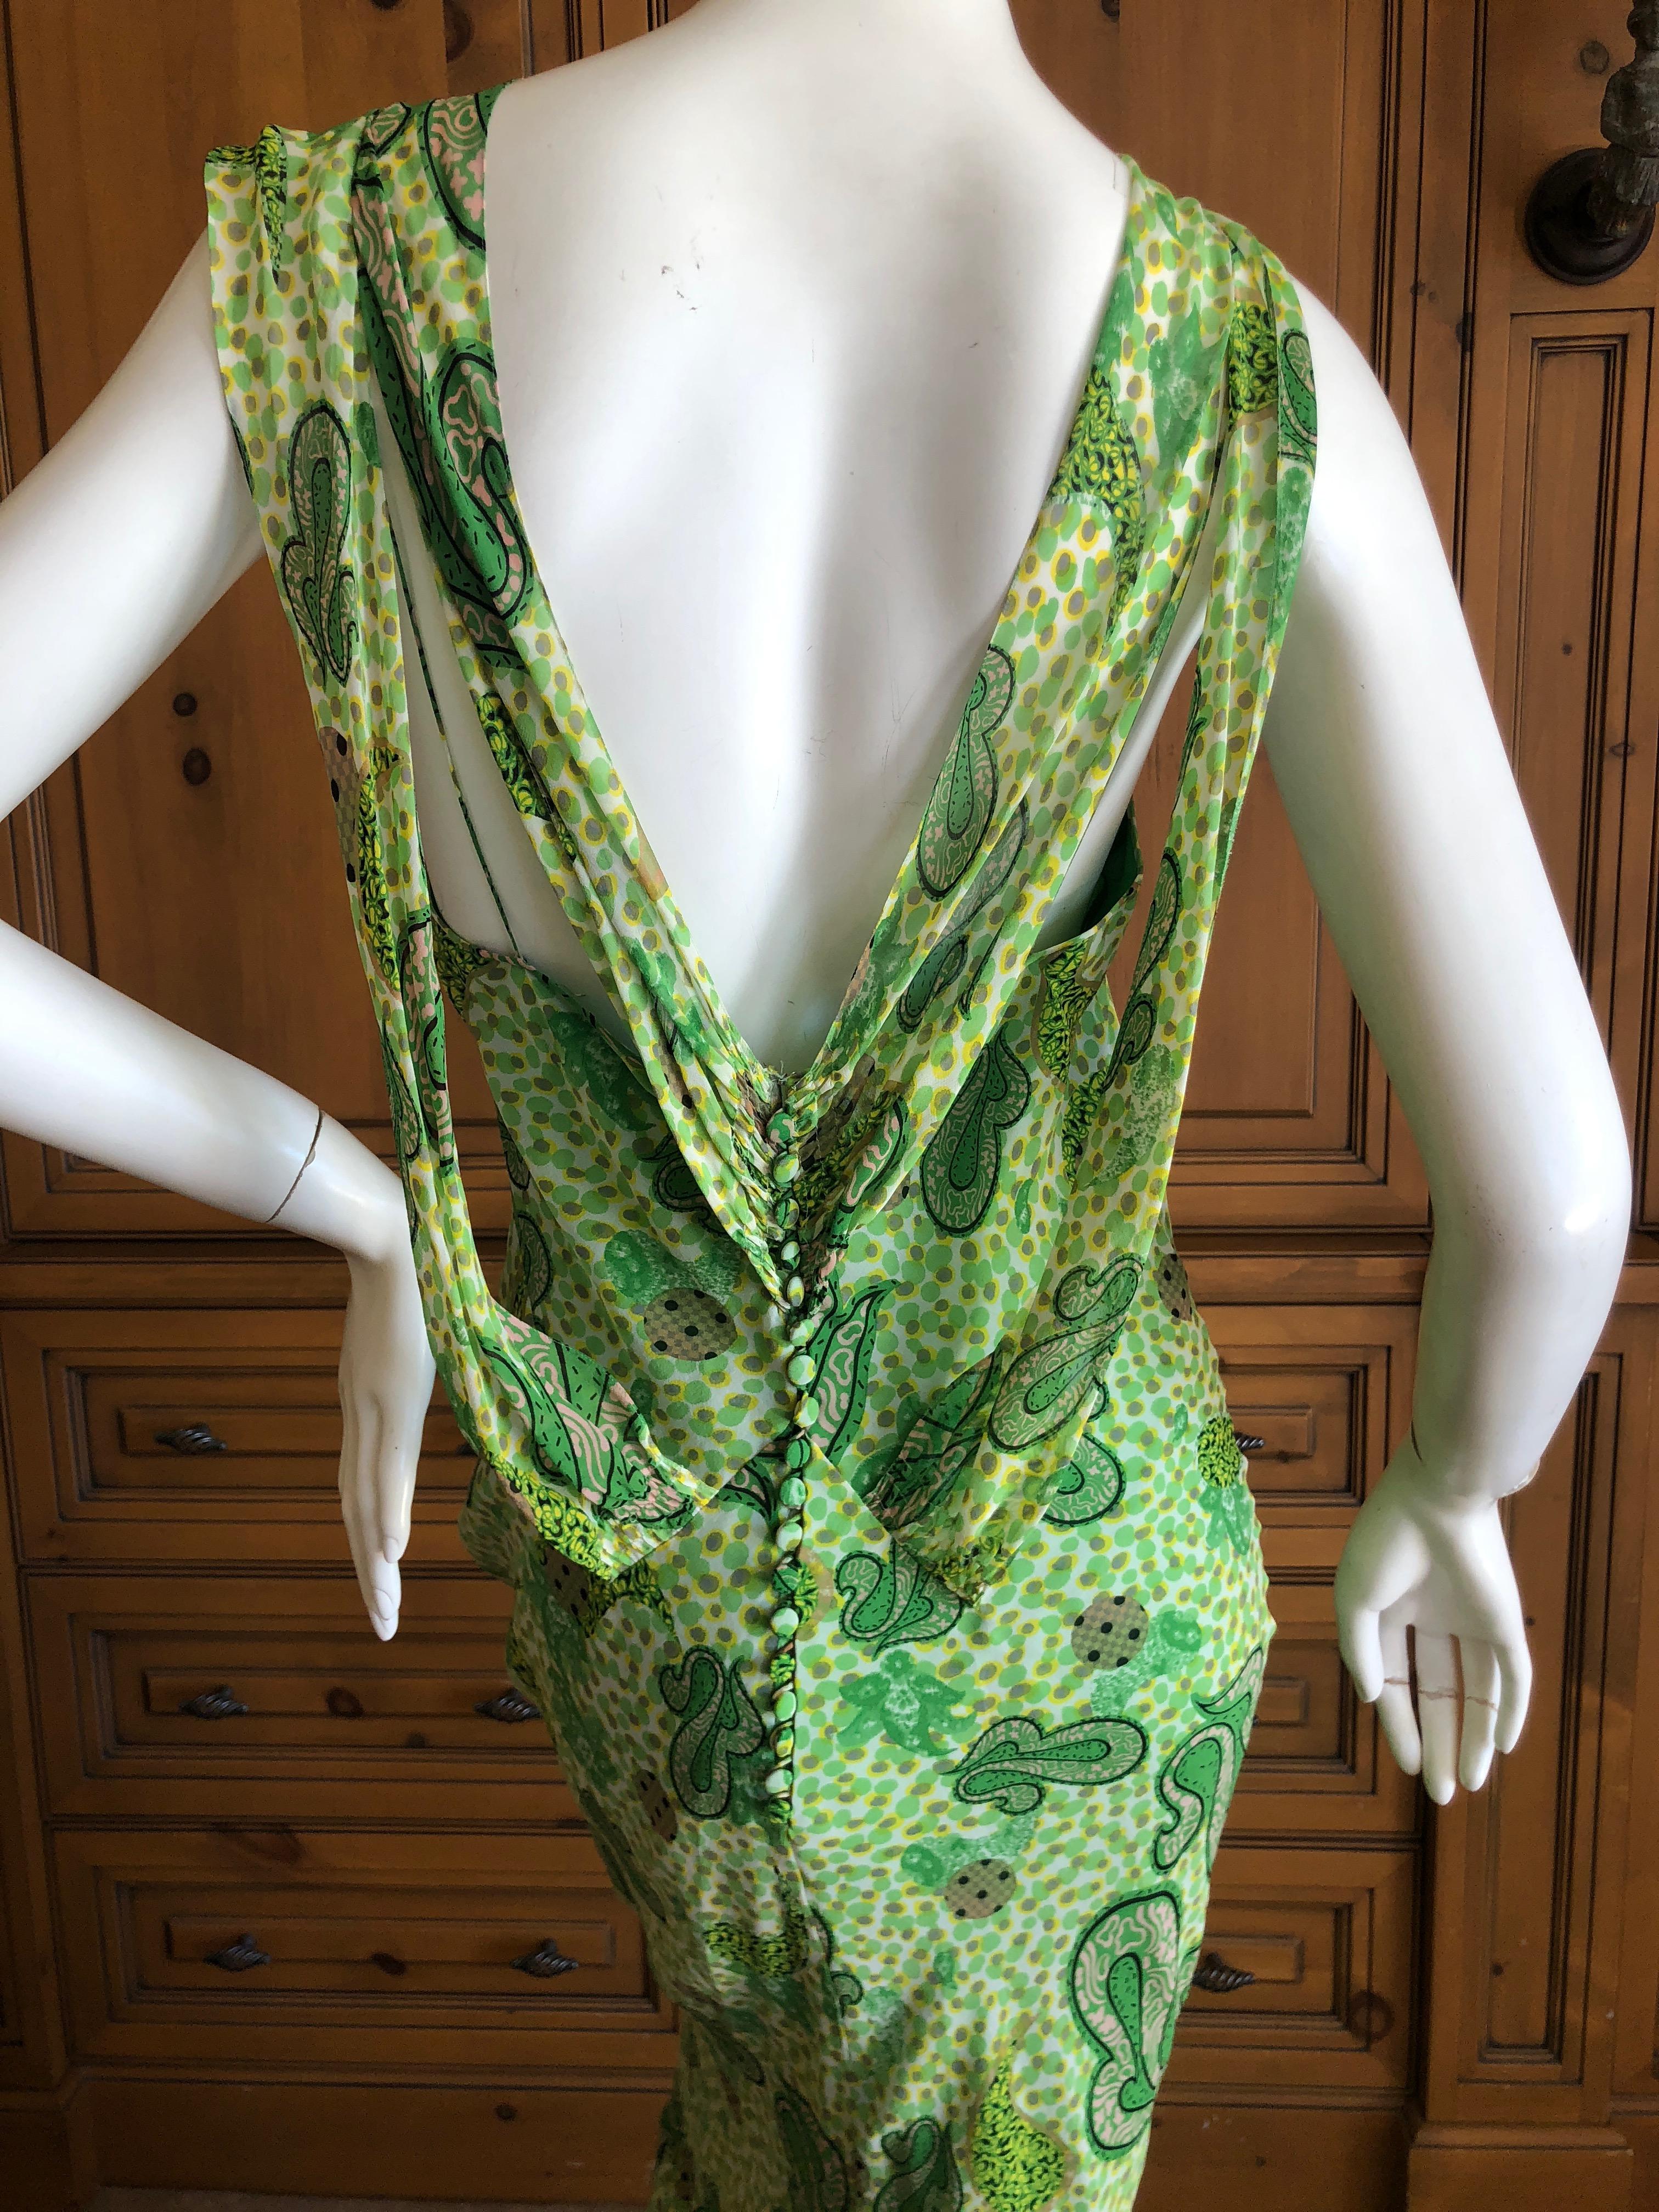  John Galliano 2002 Green Silk Paisley Ruffled Evening Dress with Low Cowl Back For Sale 3